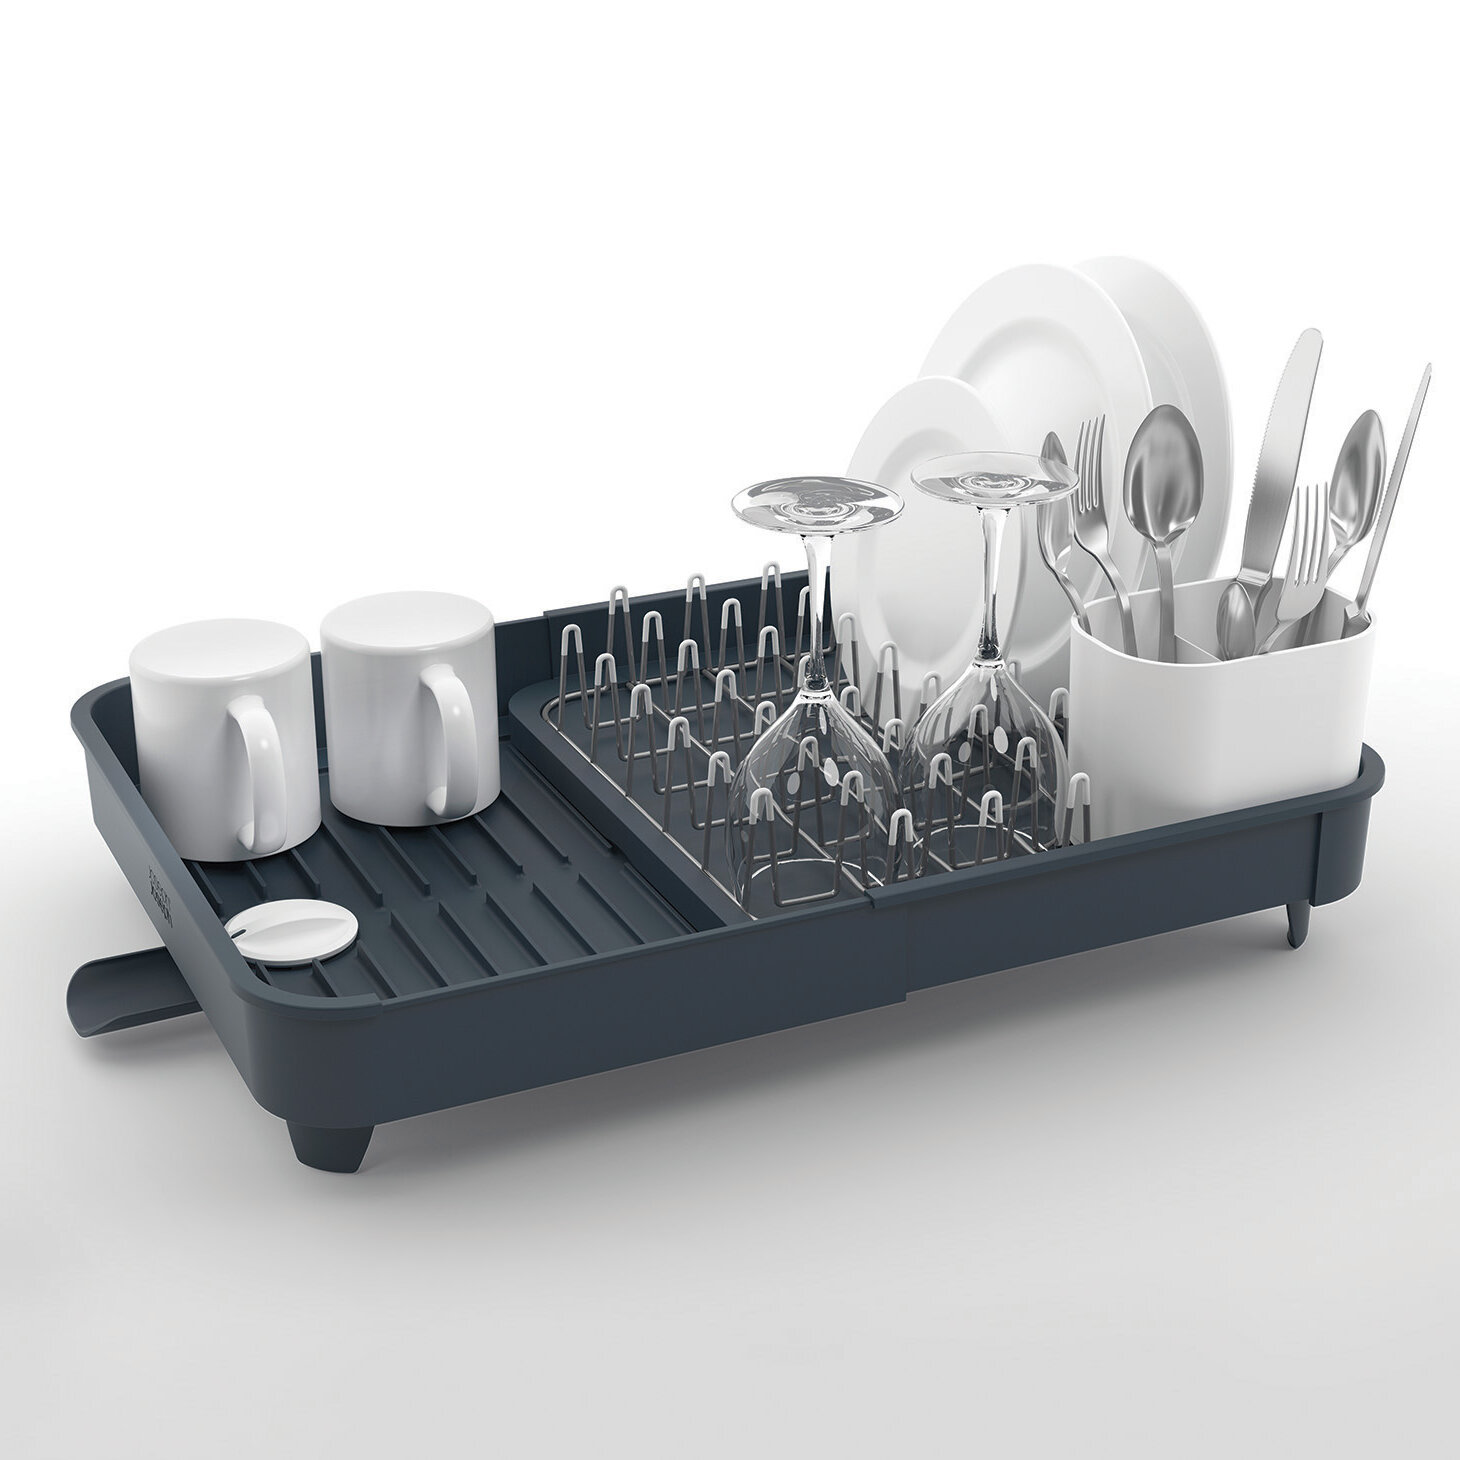  Joseph Joseph Stainless-Steel Extendable Dual Part Dish Rack  Non-Scratch and Movable Cutlery Drainer and Drainage Spout, One-size, Gray